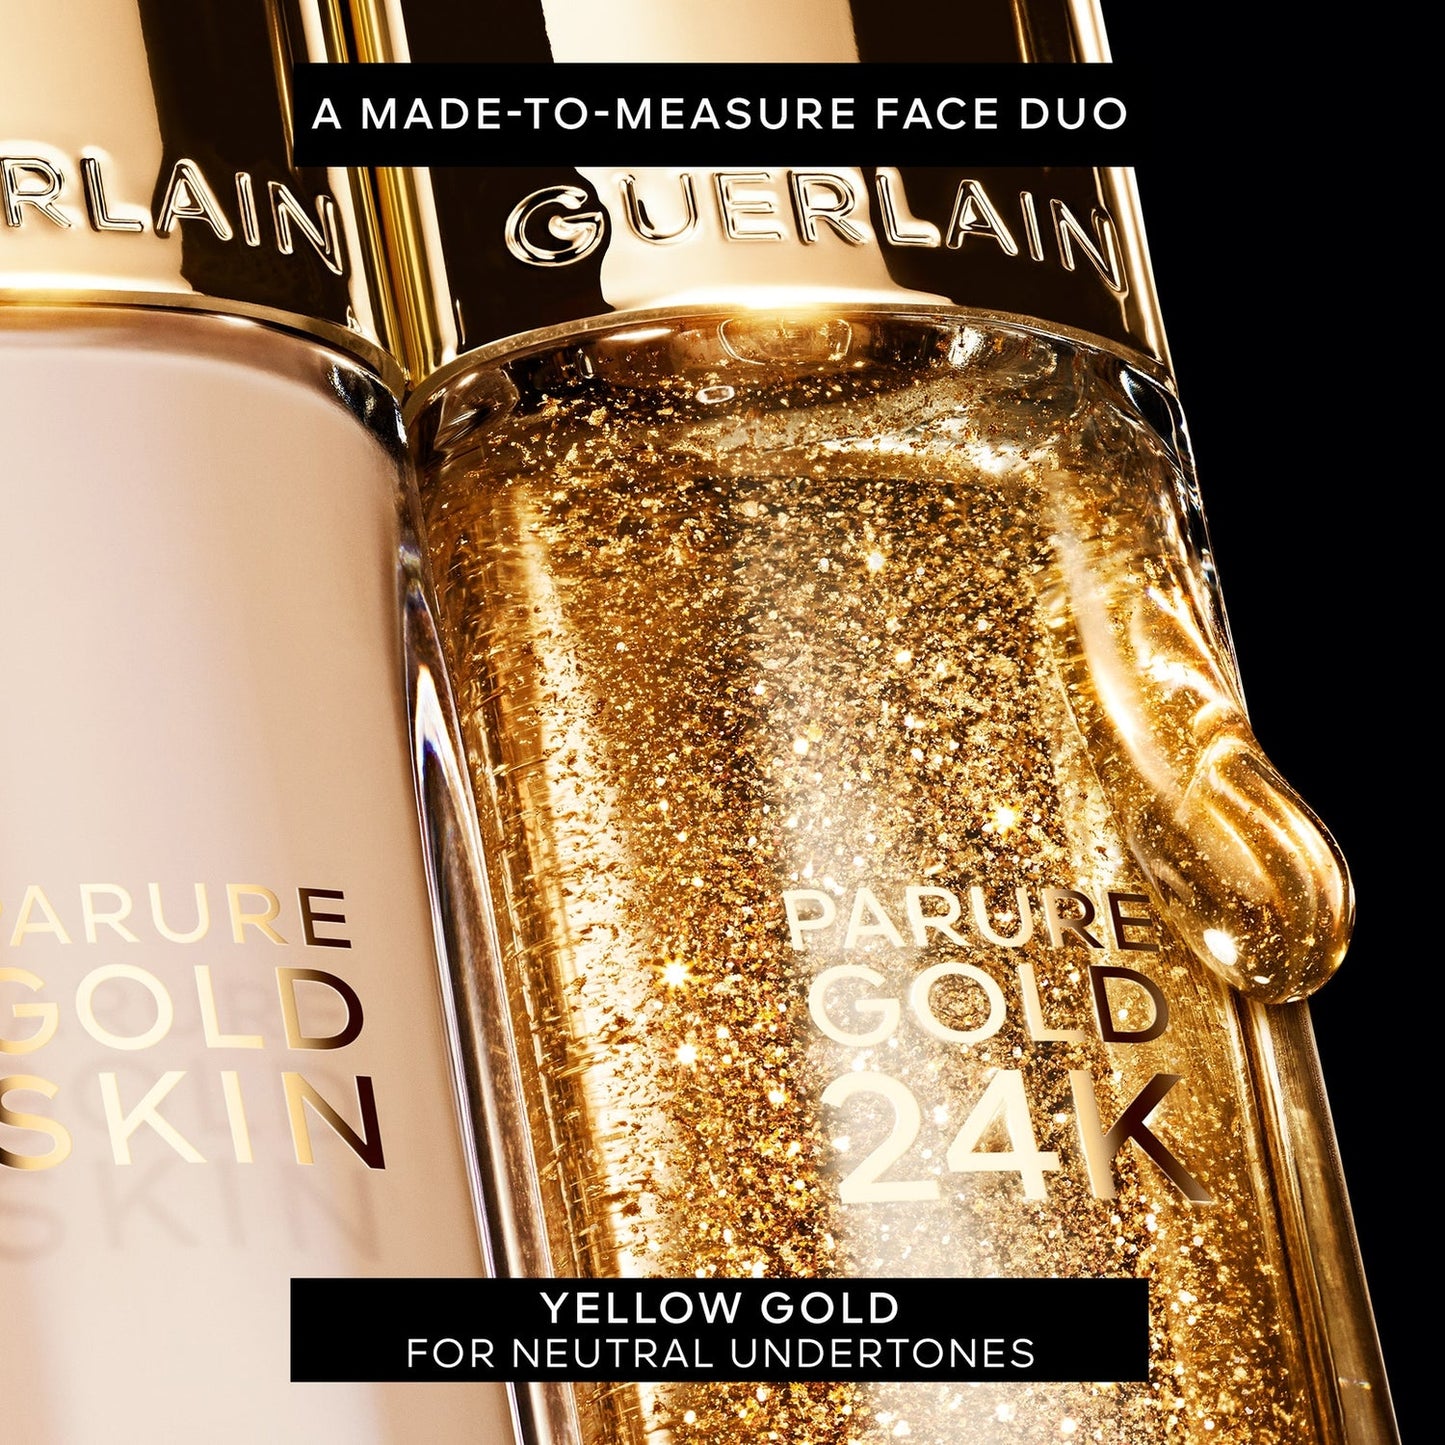 GUERLAIN 24H HYDRATION PARURE GOLD 24K RADIANCE BOOSTER PERFECTION PRIMER IN YELLOW GOLD 156ML